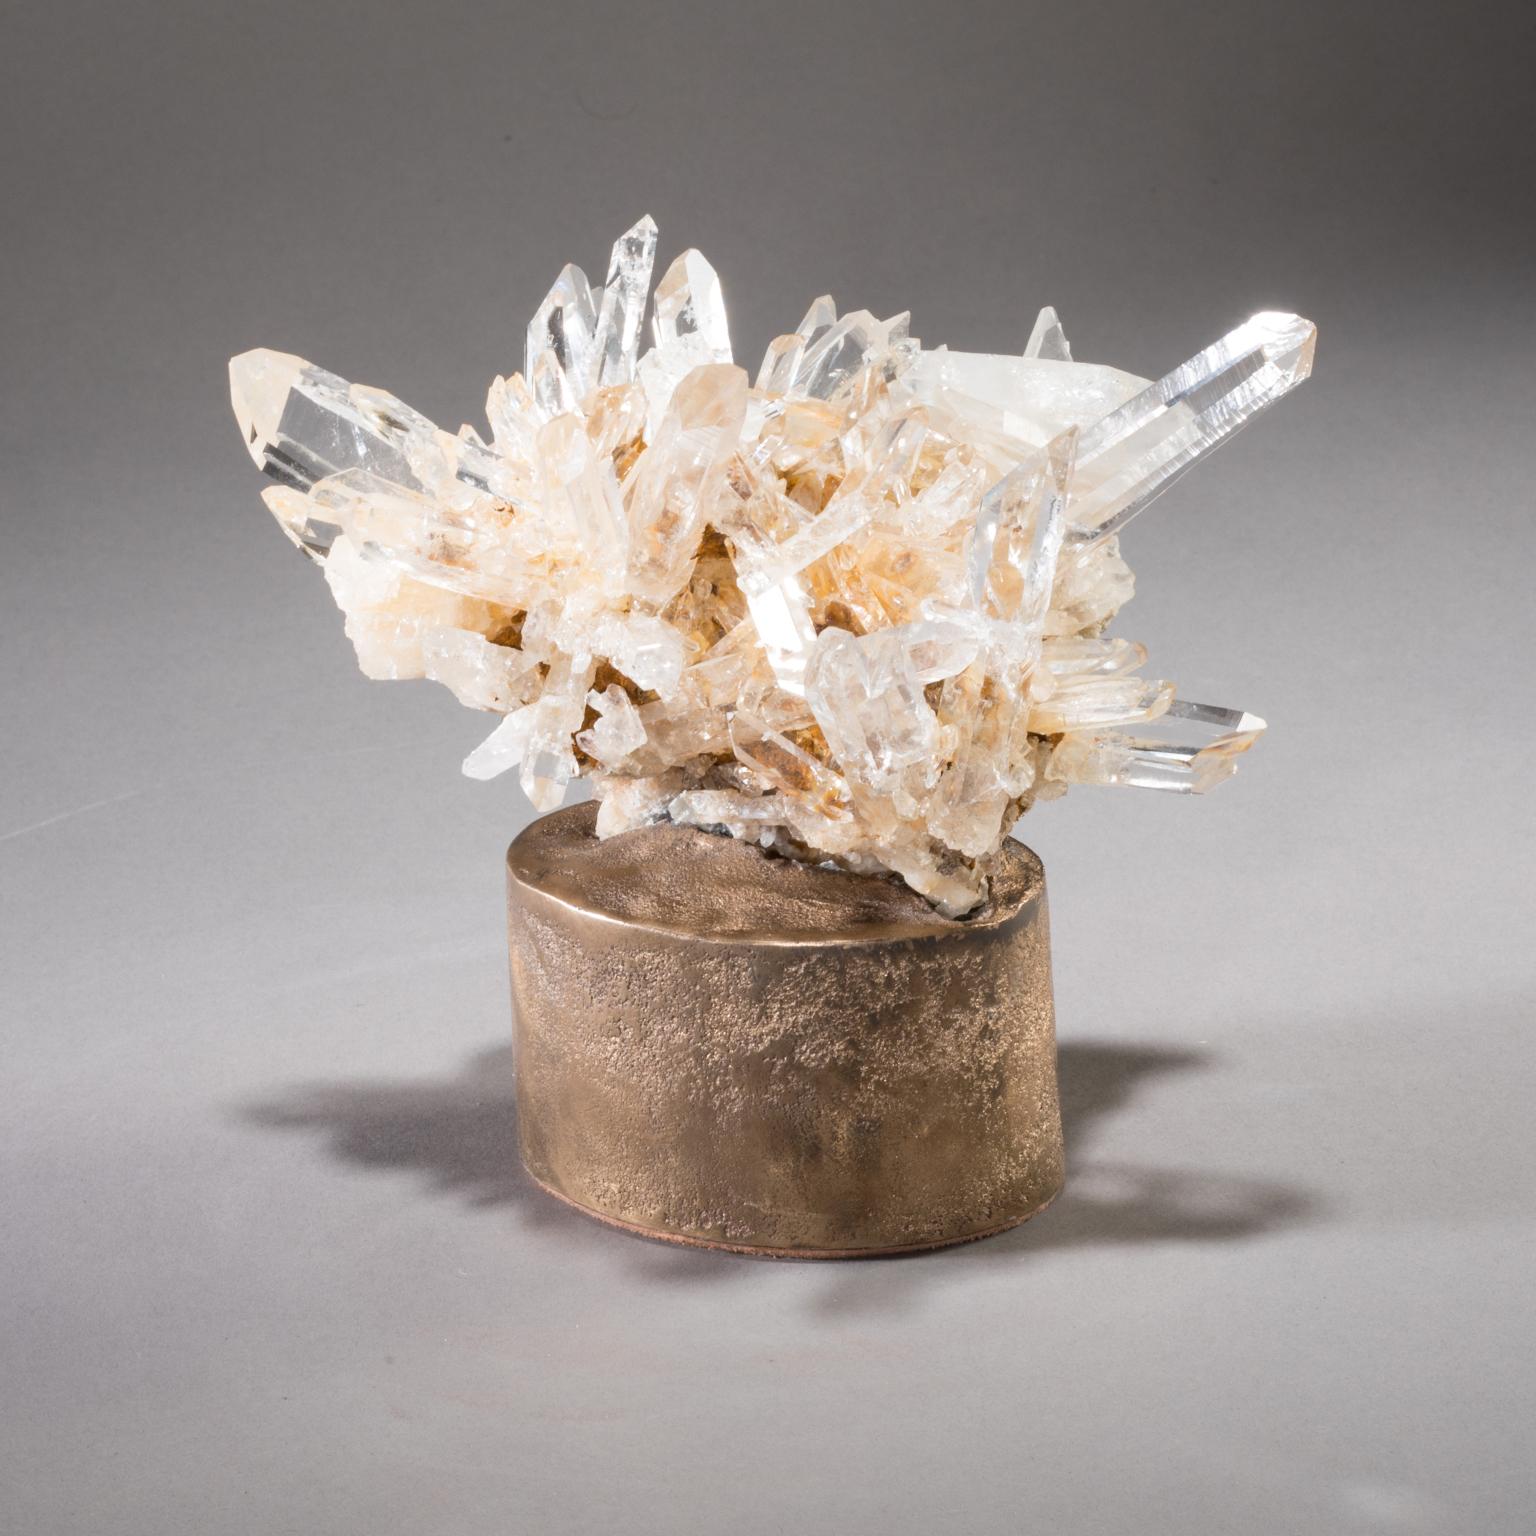 QUARTZ ON BRONZE BASE

Studio Greytak’s Quartz on bronze base is an electrical combination of two of the earth’s most beautiful elements.

Since antiquity, traditional healers have called quartz the “master healer” because it amplifies the power of